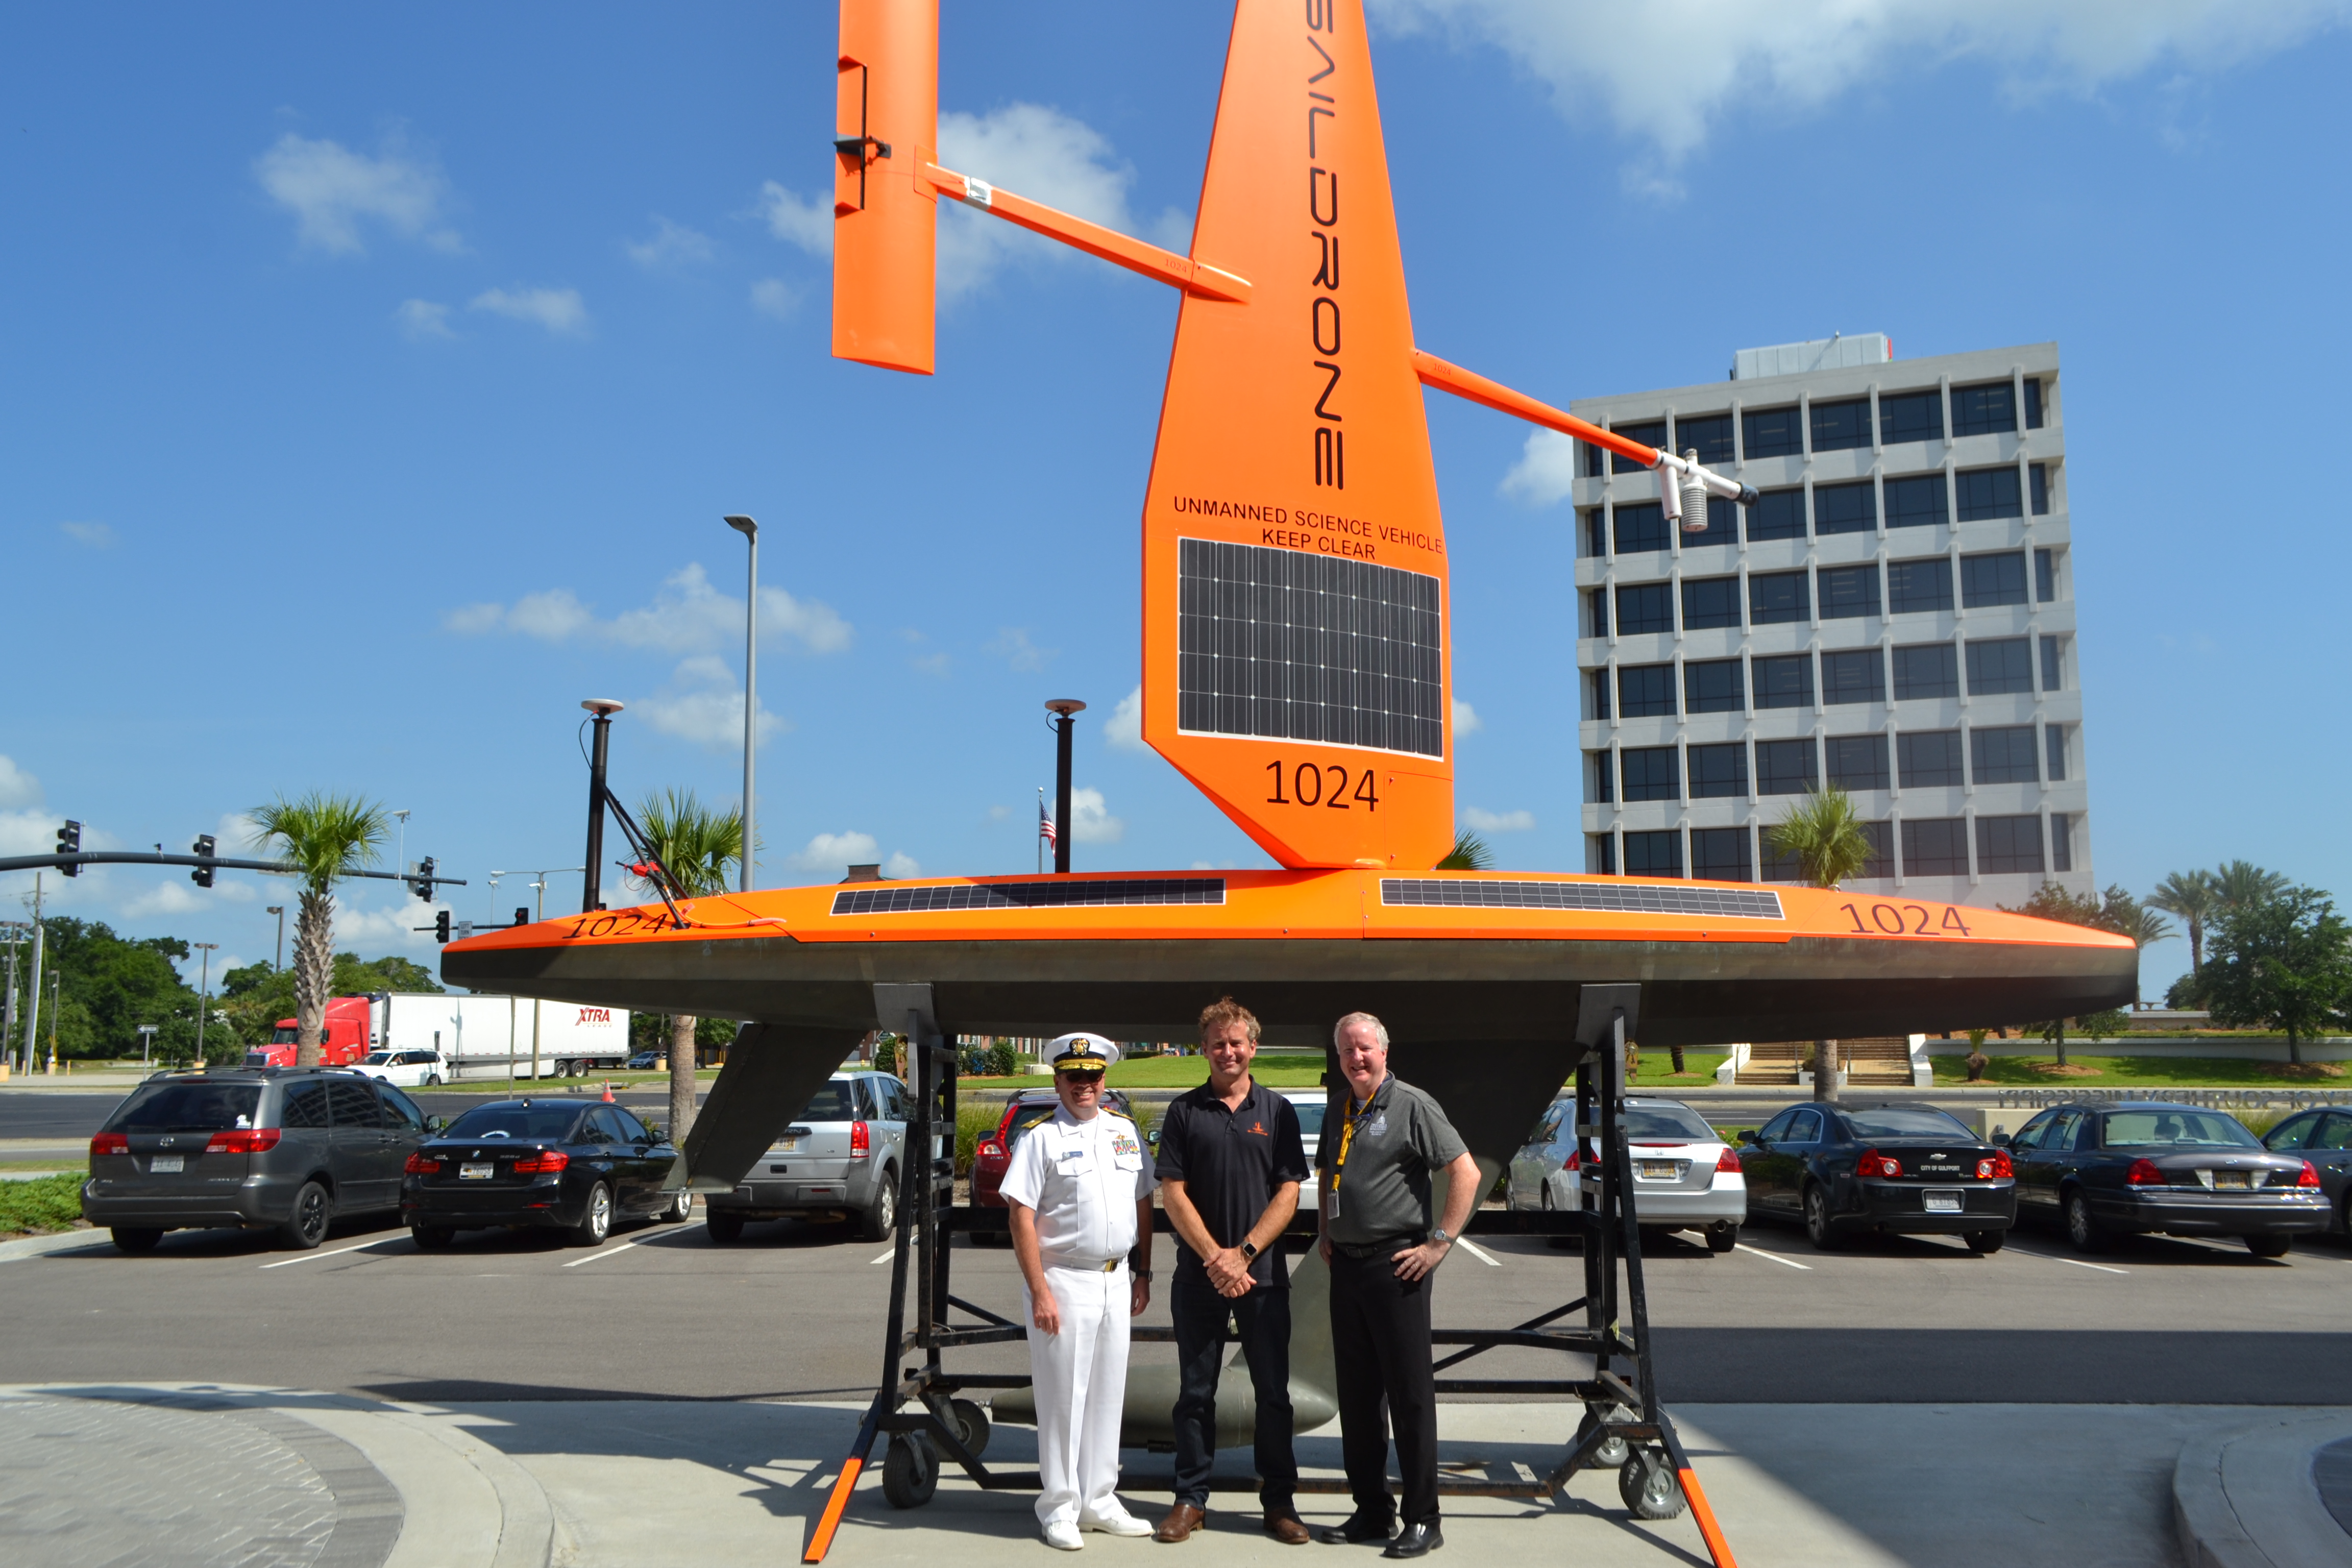 Rear Adm. Shep Smith, Richard Jenkins, and Brian Connon in front of a Saildrone.